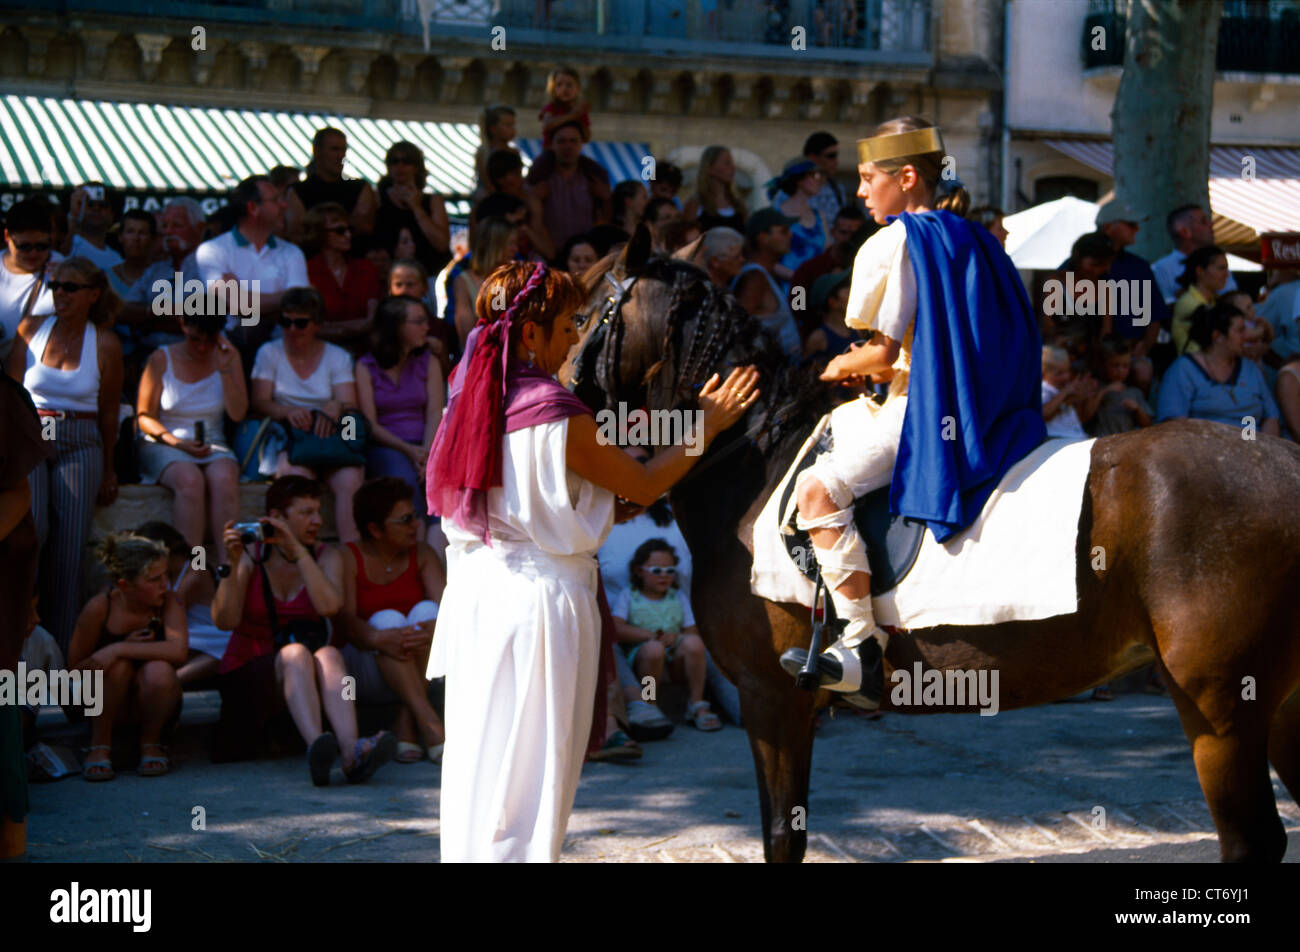 St Jean De Fos France Languedoc-Roussillon Pageant Celebrating Charlemagne's Arrival In Town In 804 Stock Photo